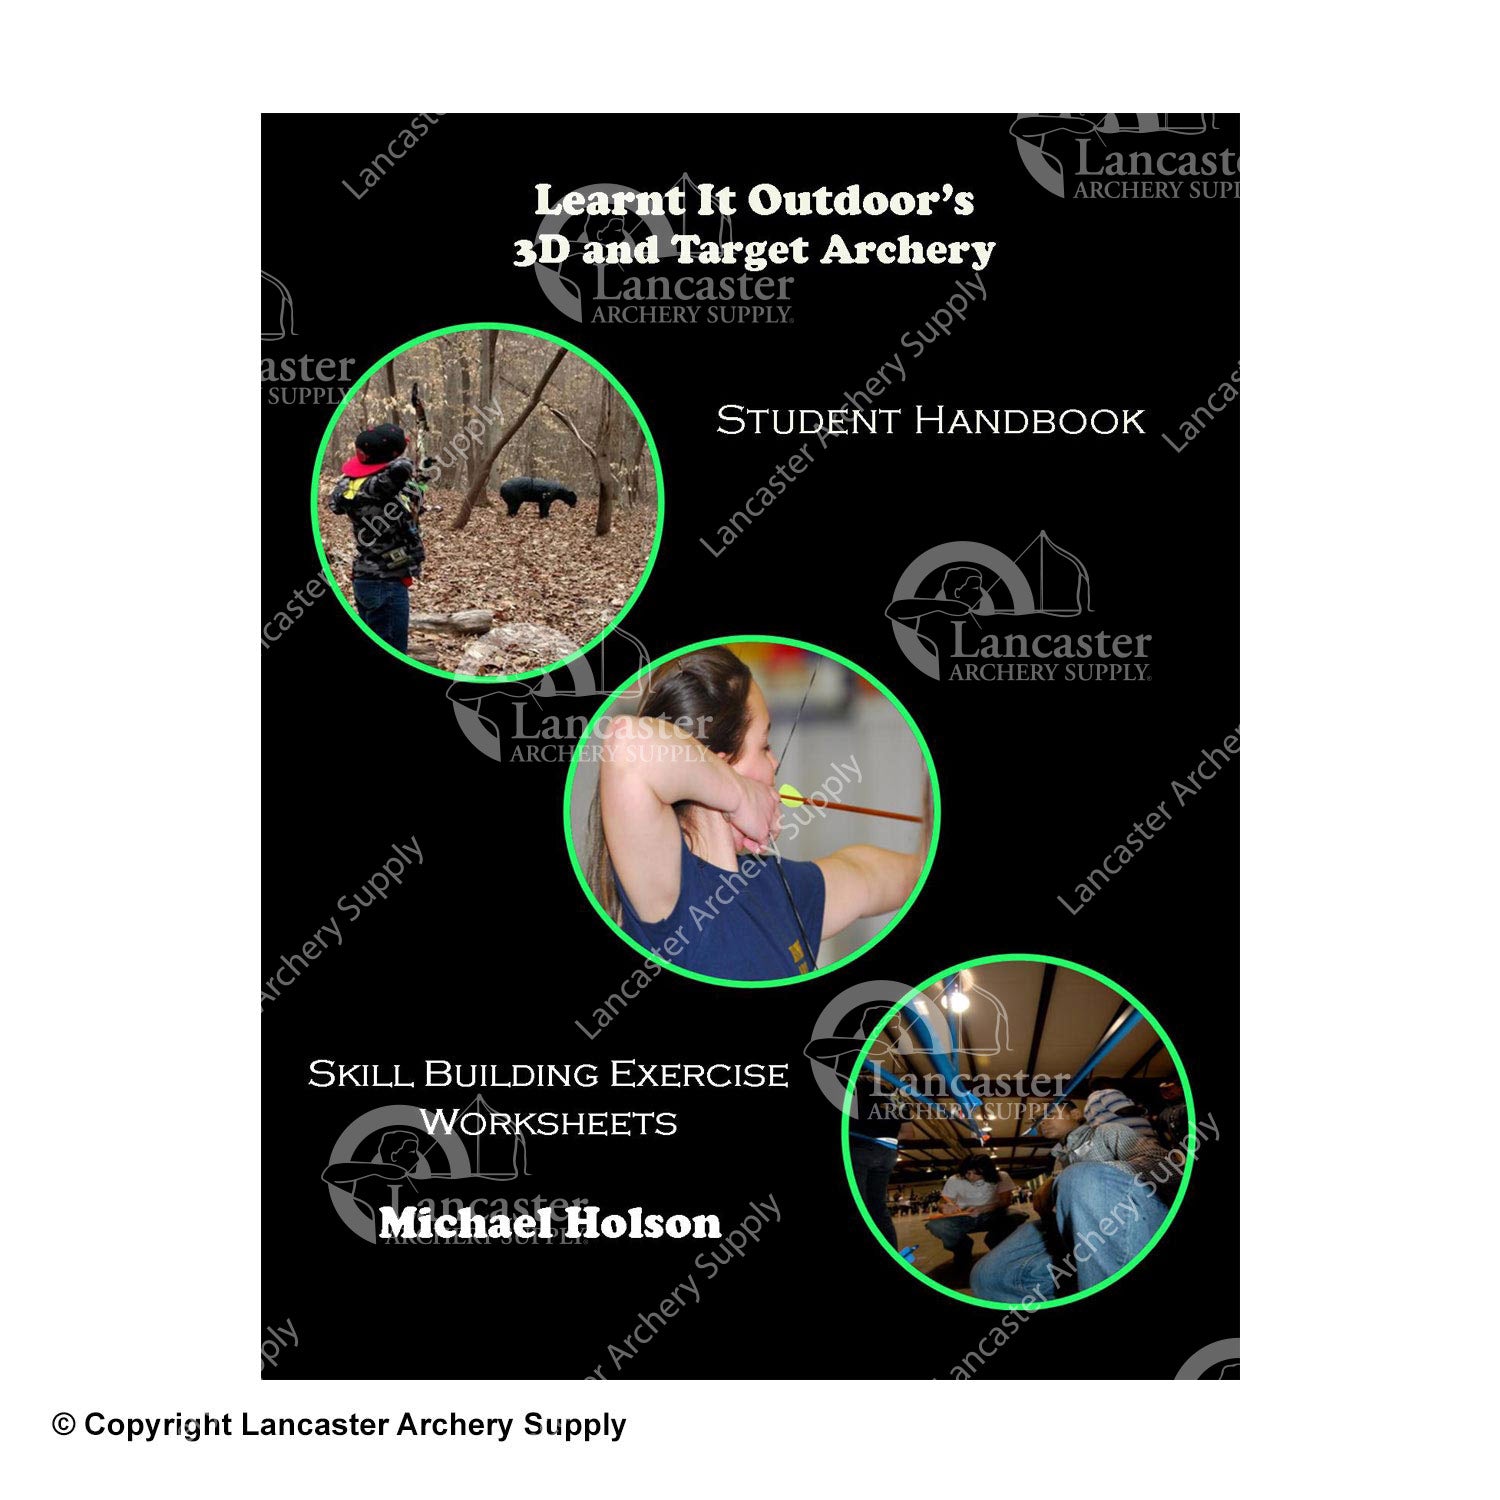 Learnt It Outdoor's 3D and Target Archery Student Handbook by Mike Holson